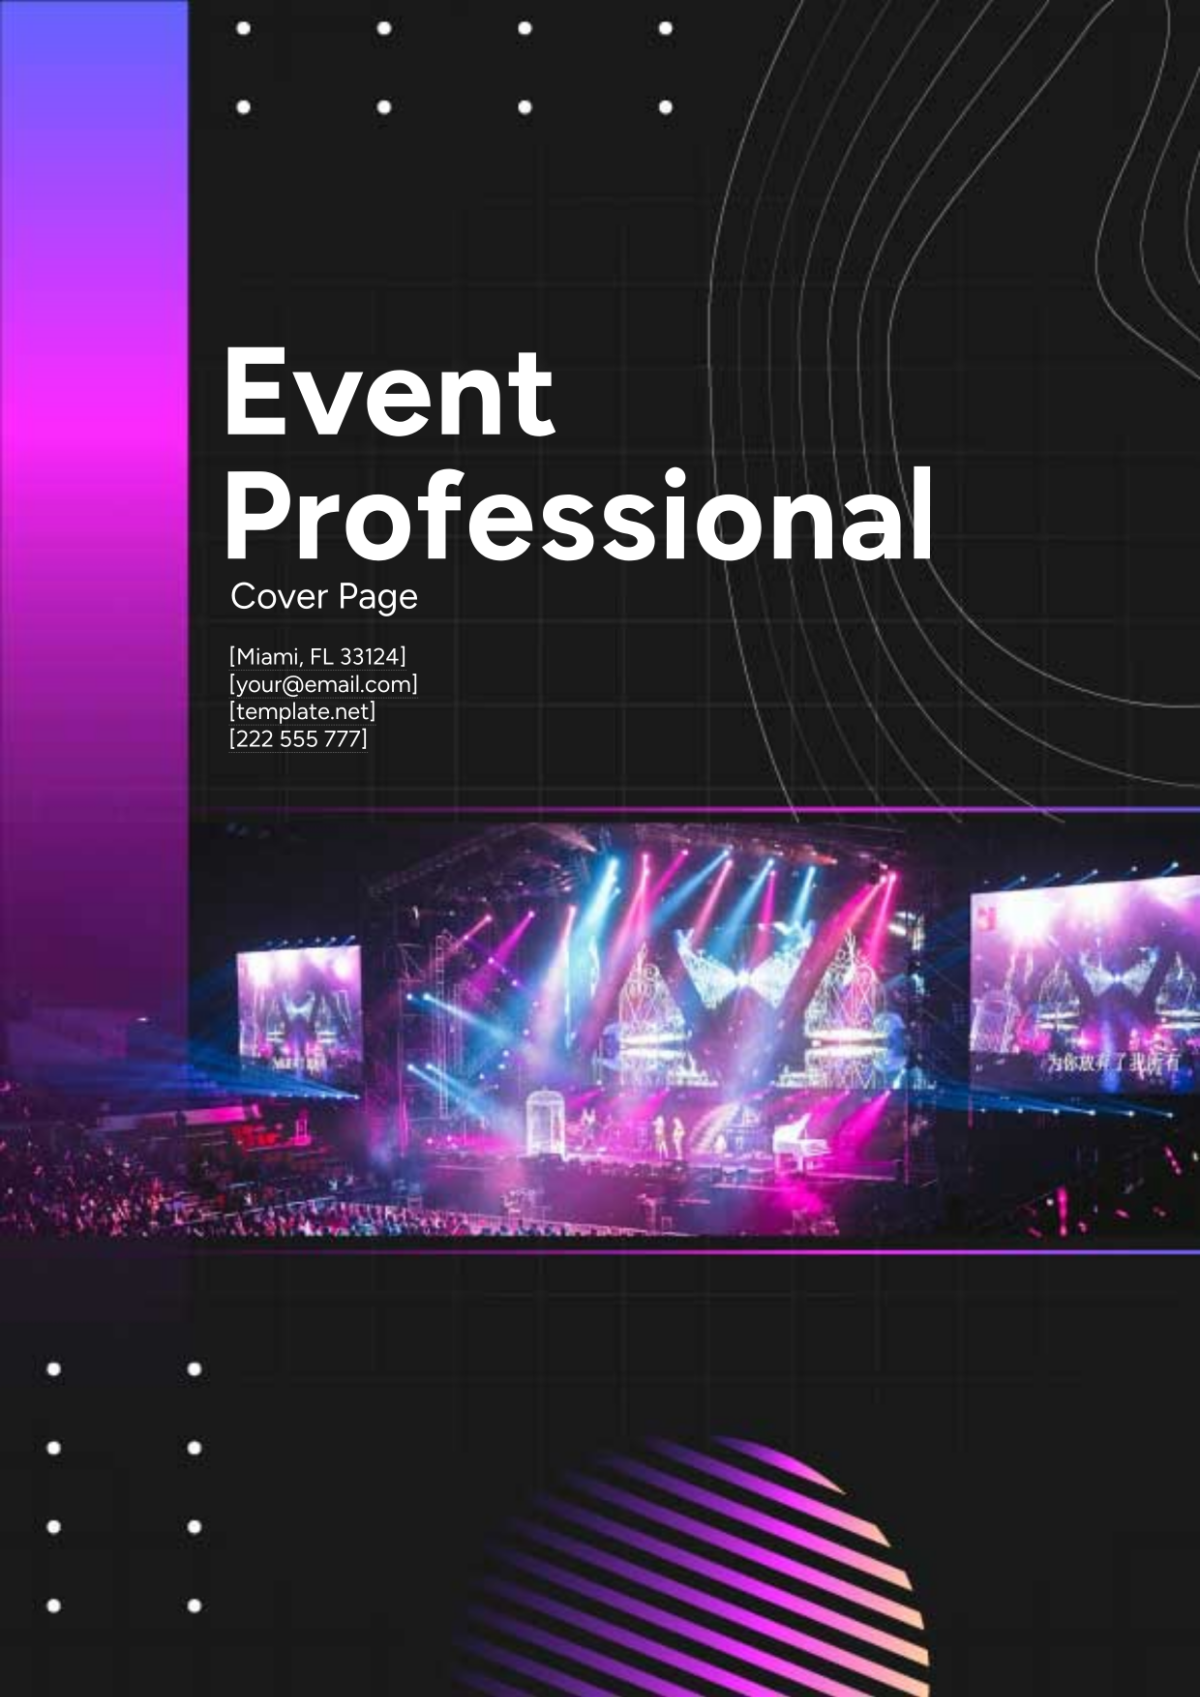 Free Event Professional Cover Page Template